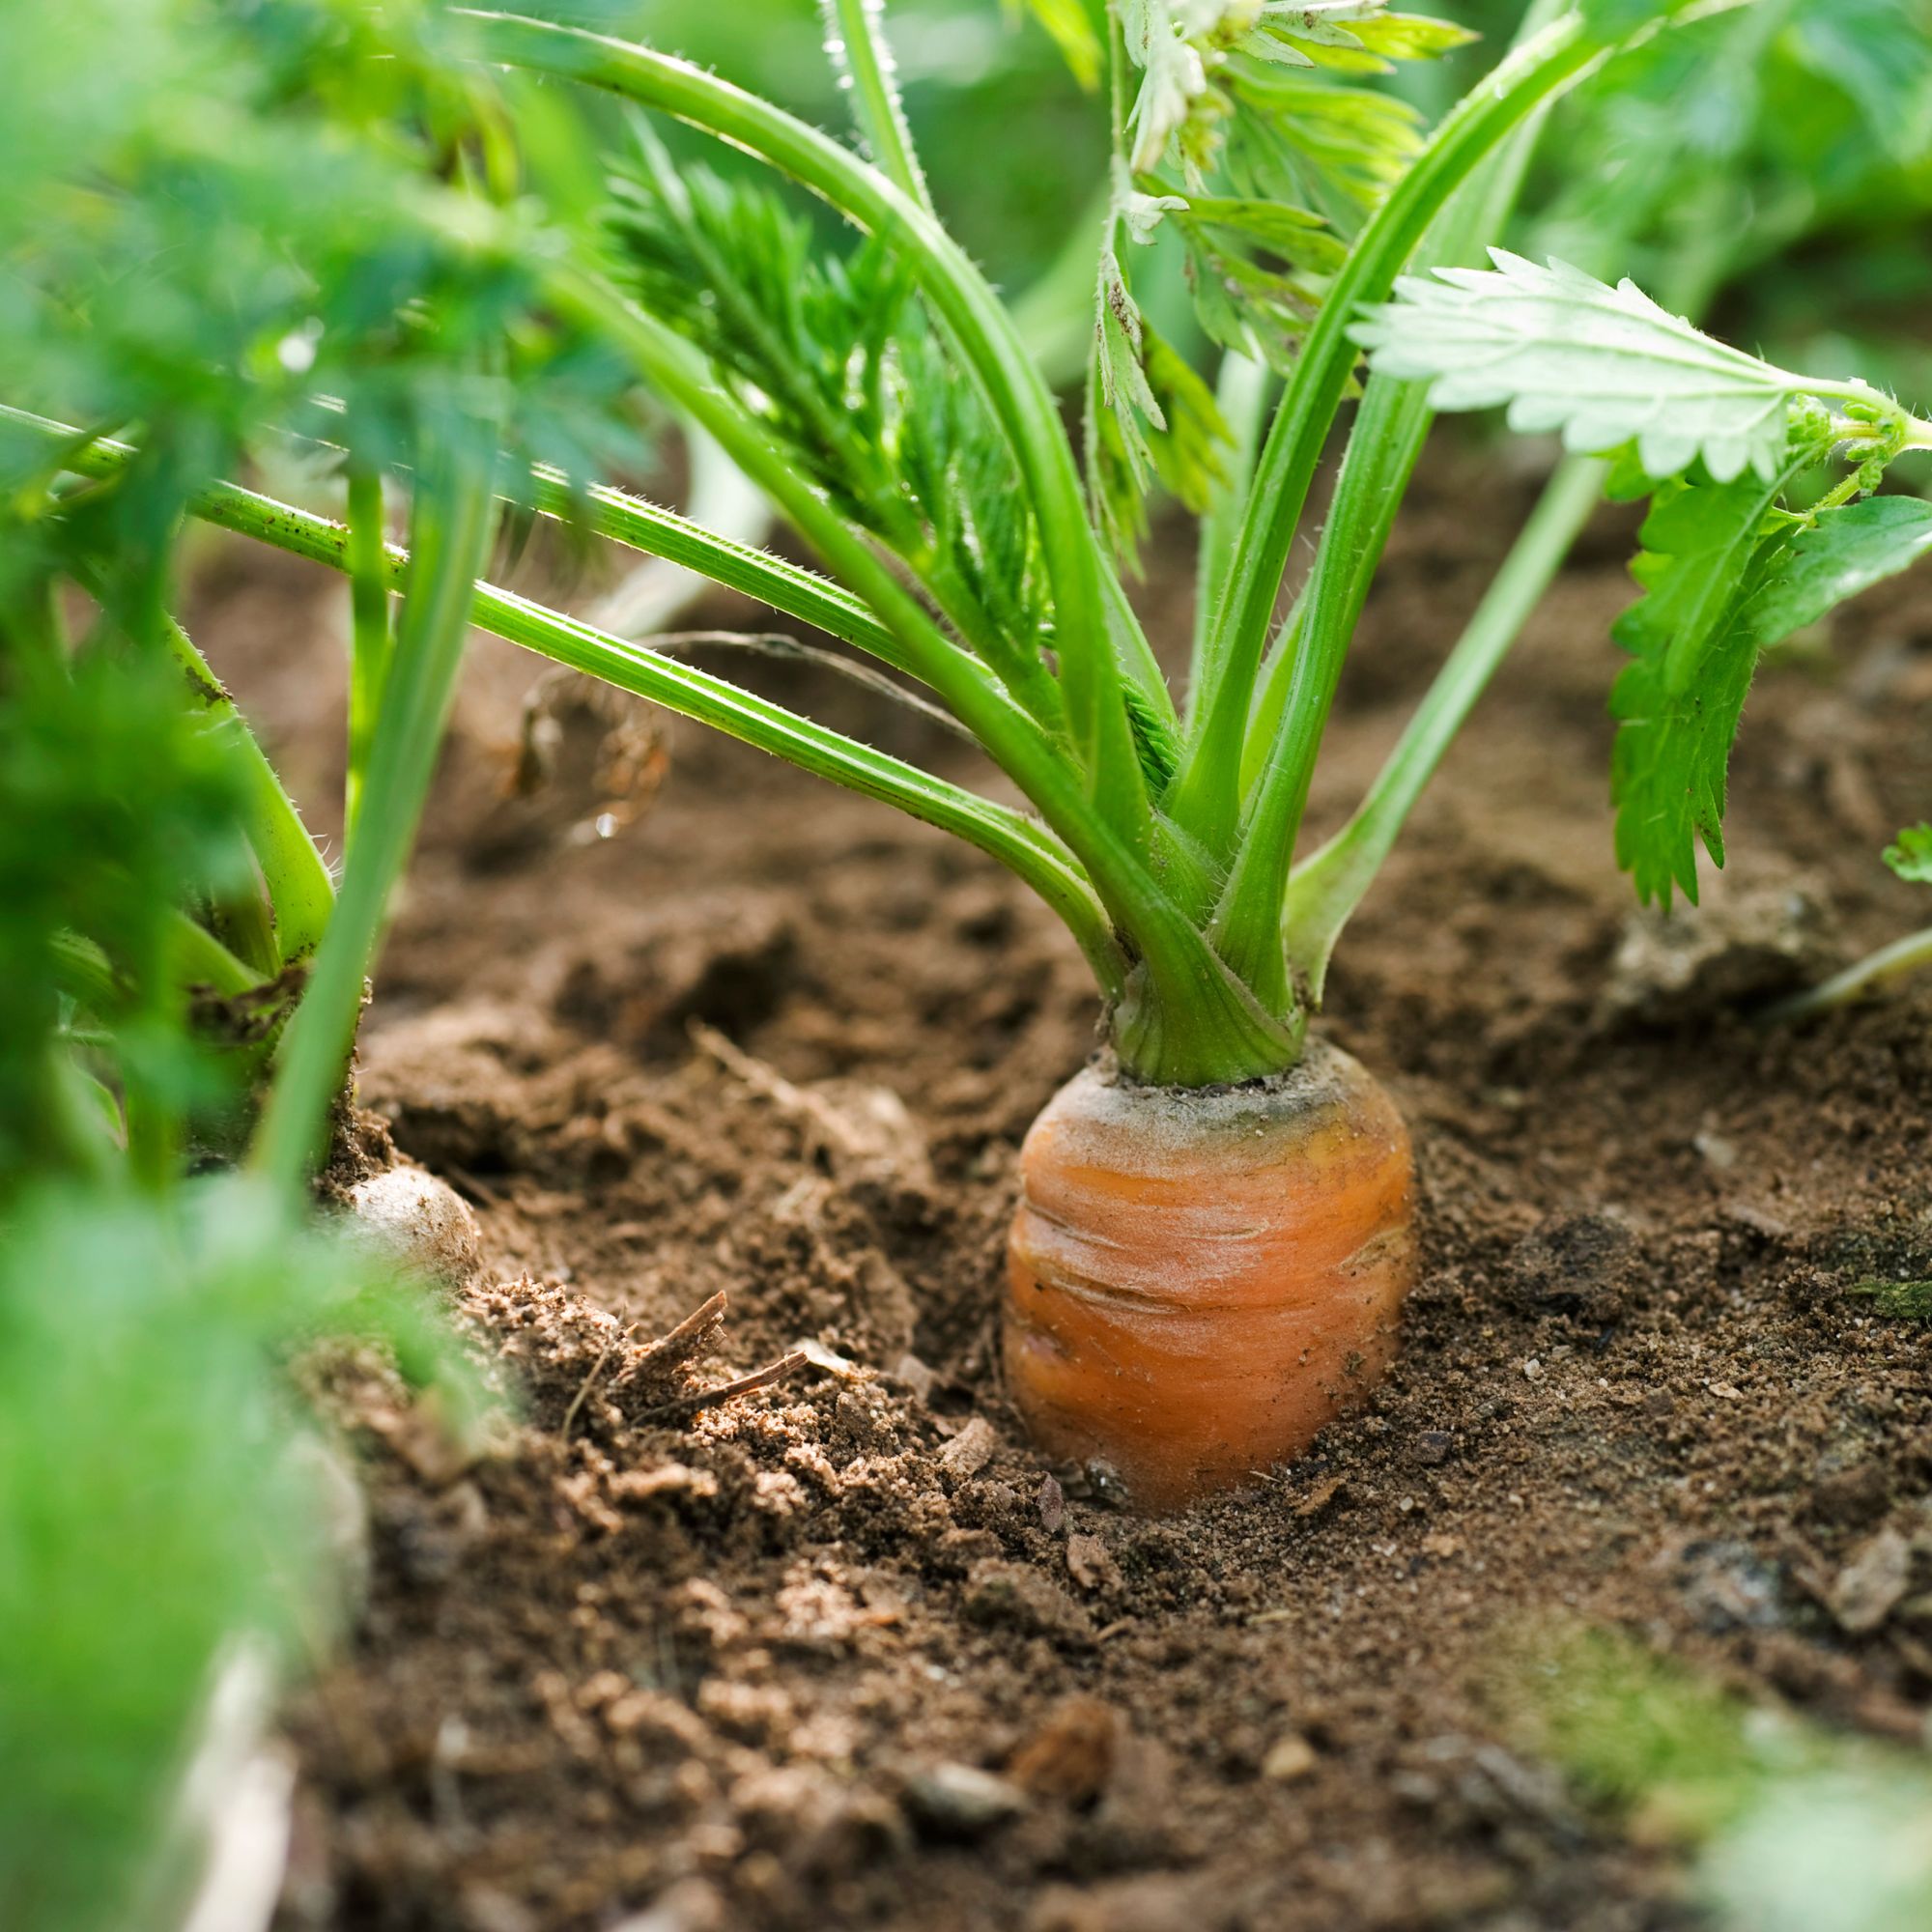 A close-up image of a carrot growing in a garden plot